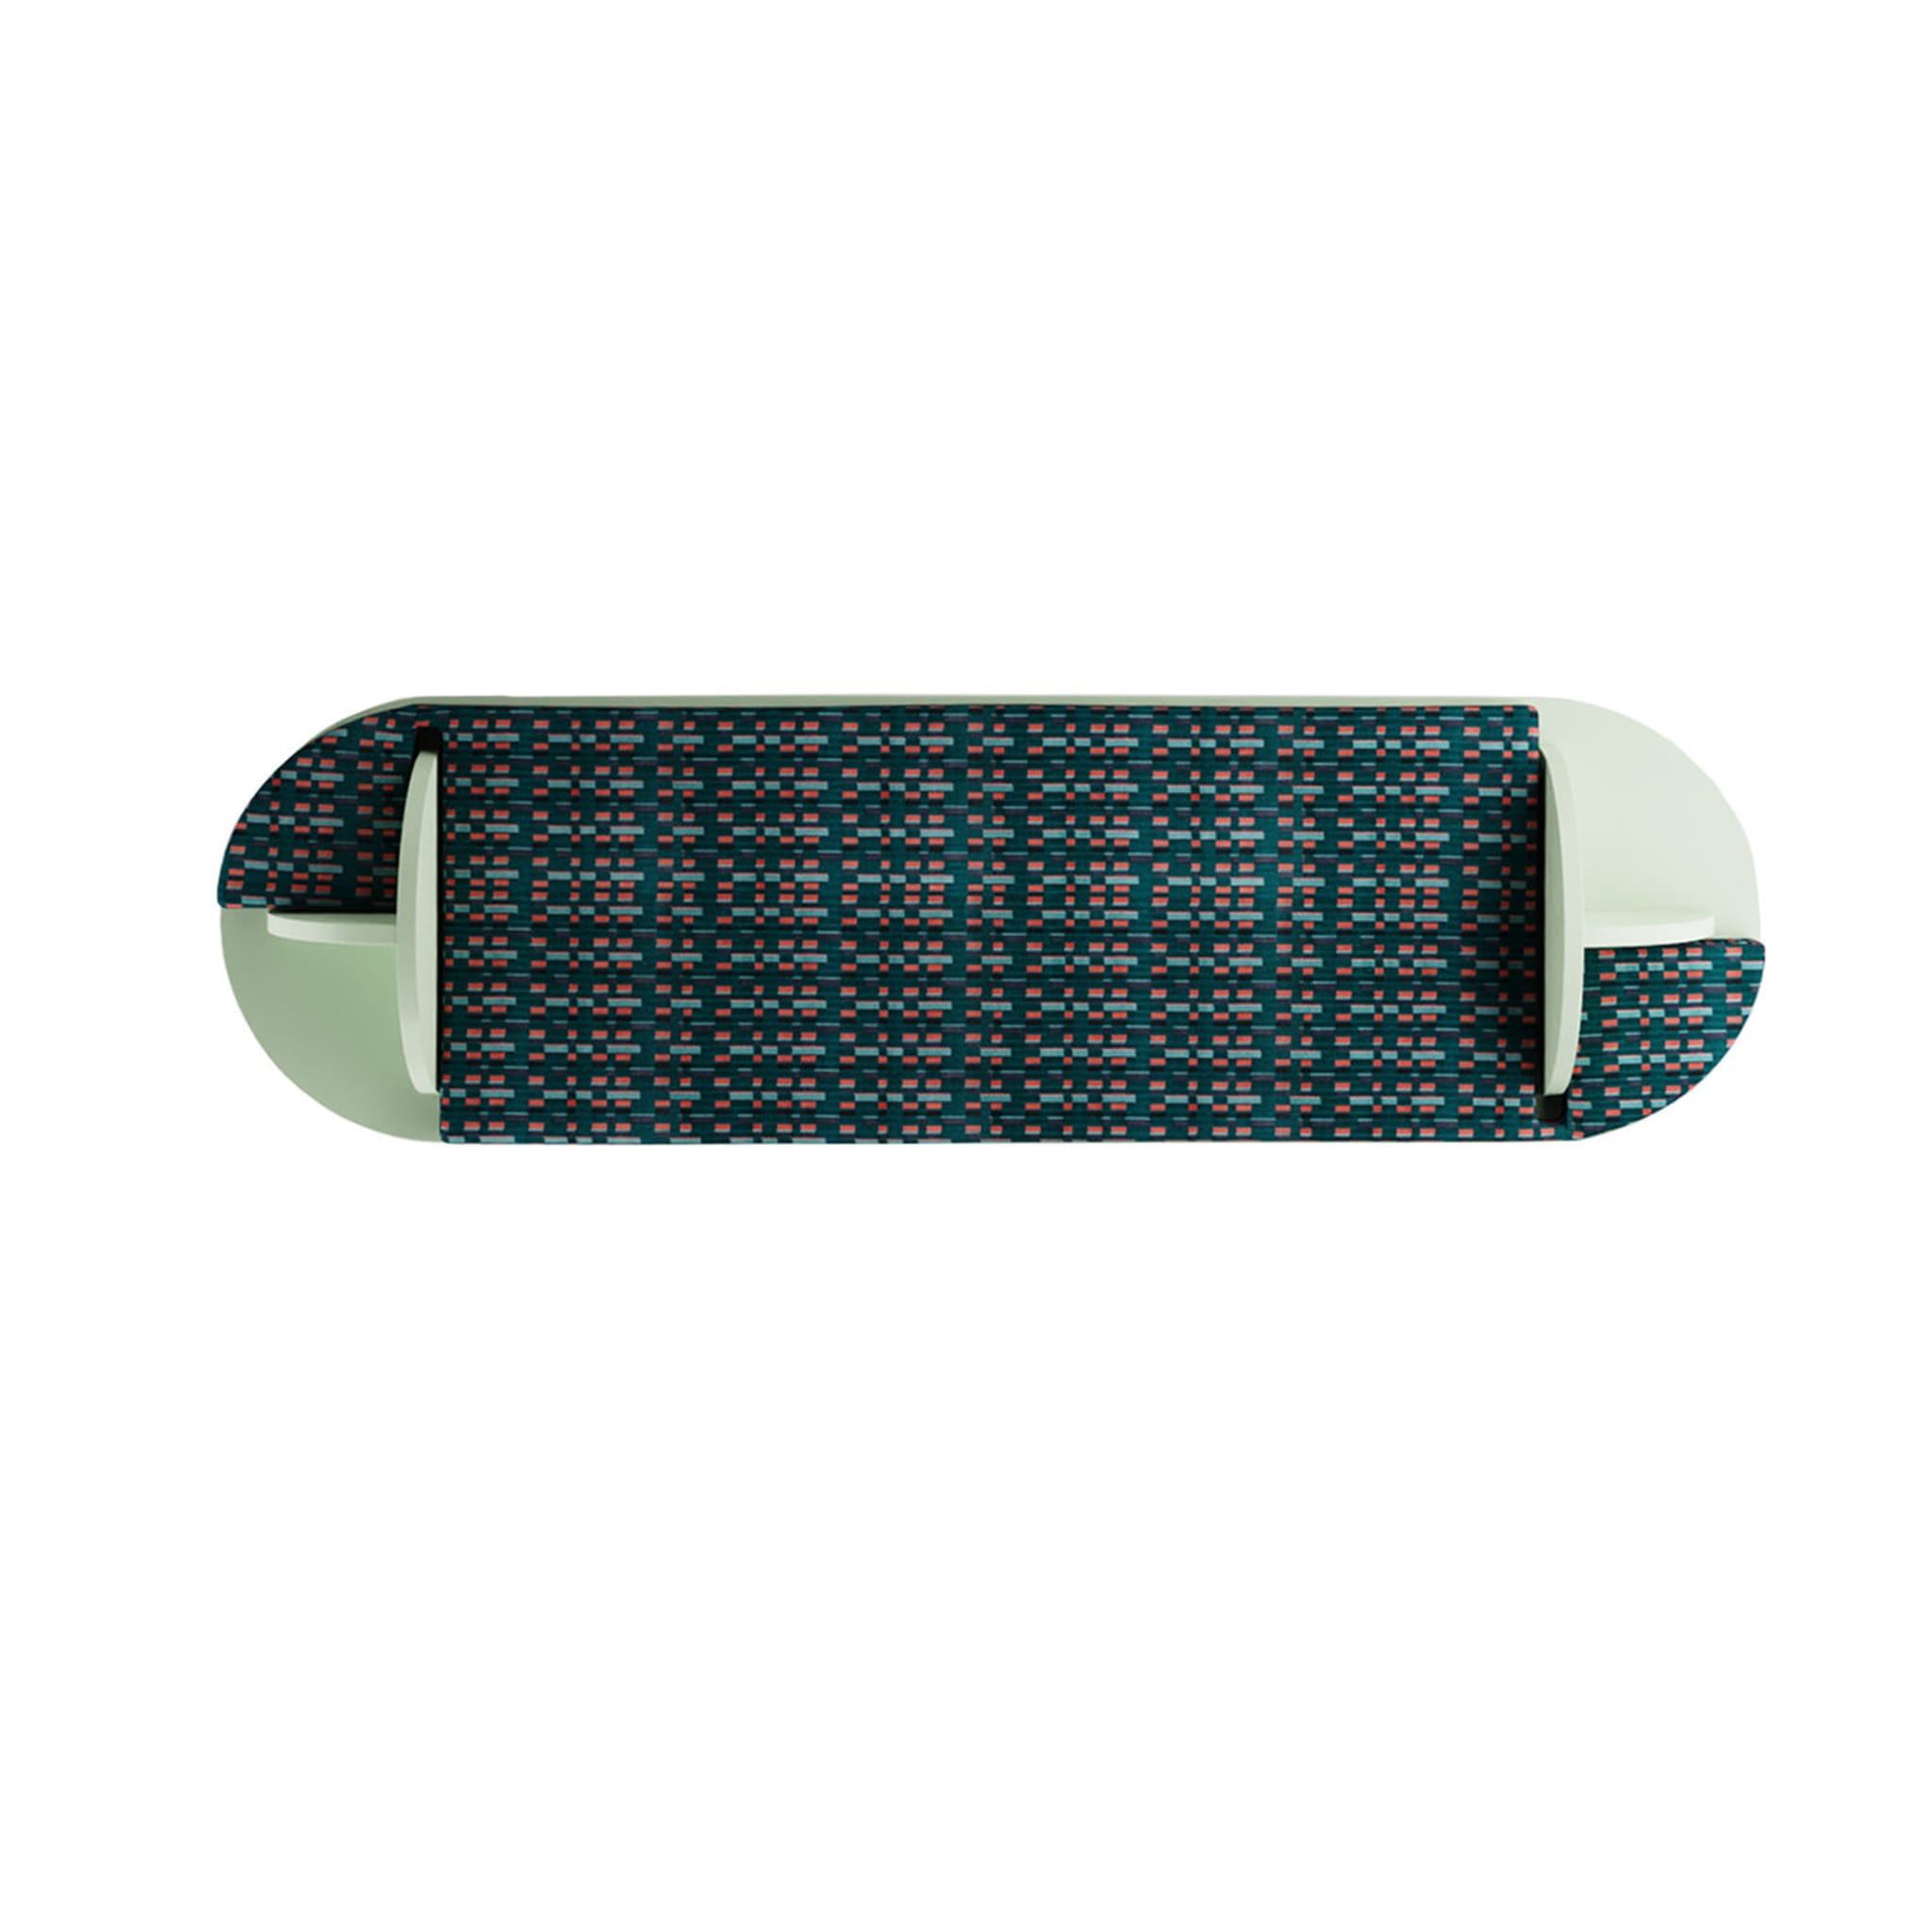 F4 Piccadilly Teal Bench - Alternative view 1